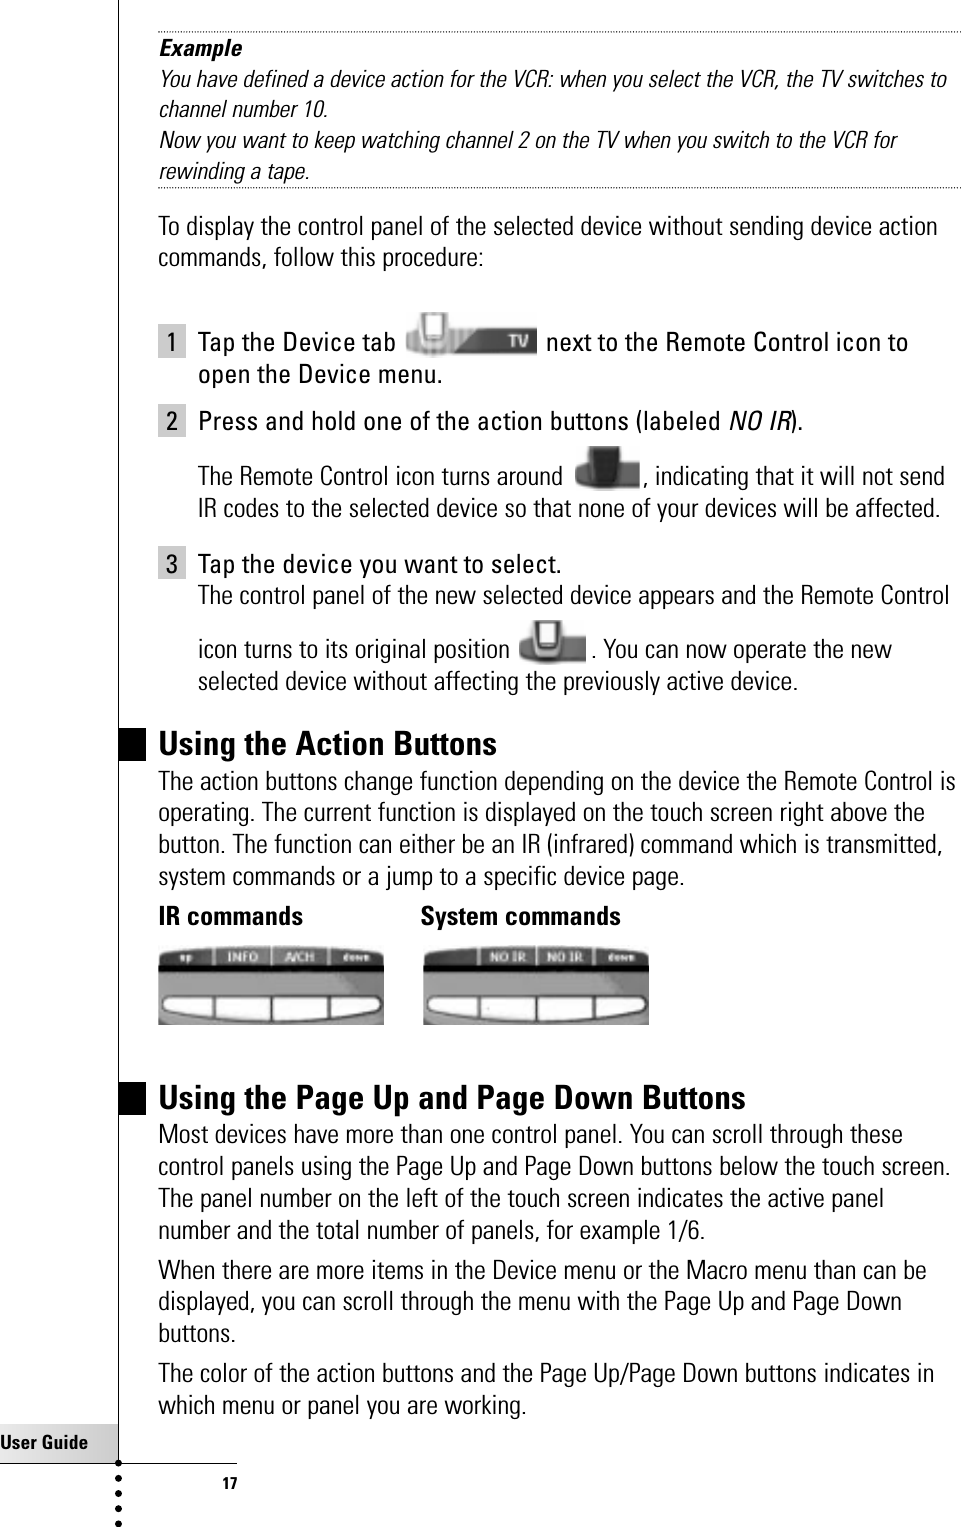 User Guide17Getting StartedExampleYou have defined a device action for the VCR: when you select the VCR, the TV switches tochannel number 10.Now you want to keep watching channel 2 on the TV when you switch to the VCR forrewinding a tape. To display the control panel of the selected device without sending device actioncommands, follow this procedure:1 Tap the Device tab  next to the Remote Control icon toopen the Device menu.2 Press and hold one of the action buttons (labeled NO IR).The Remote Control icon turns around  , indicating that it will not sendIR codes to the selected device so that none of your devices will be affected.3 Tap the device you want to select.The control panel of the new selected device appears and the Remote Controlicon turns to its original position . You can now operate the newselected device without affecting the previously active device.Using the Action ButtonsThe action buttons change function depending on the device the Remote Control isoperating. The current function is displayed on the touch screen right above thebutton. The function can either be an IR (infrared) command which is transmitted,system commands or a jump to a specific device page.IR commands System commandsUsing the Page Up and Page Down ButtonsMost devices have more than one control panel. You can scroll through thesecontrol panels using the Page Up and Page Down buttons below the touch screen.The panel number on the left of the touch screen indicates the active panelnumber and the total number of panels, for example 1/6.When there are more items in the Device menu or the Macro menu than can bedisplayed, you can scroll through the menu with the Page Up and Page Downbuttons. The color of the action buttons and the Page Up/Page Down buttons indicates inwhich menu or panel you are working.